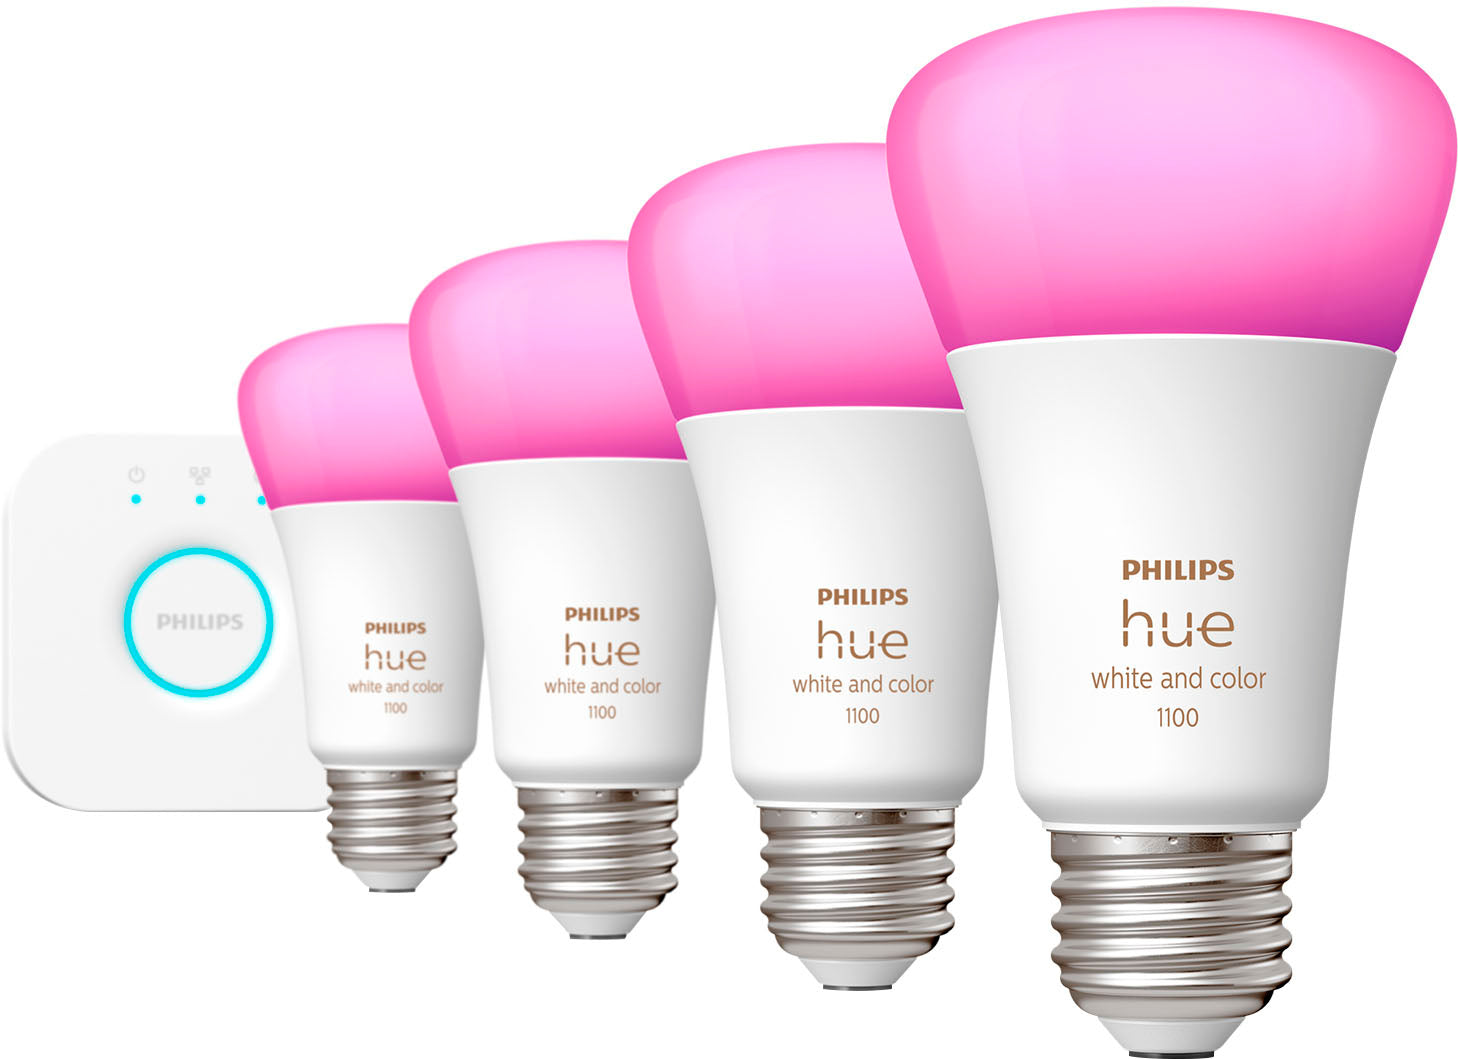 Philips - 563296 Hue White and Color Ambiance A19 Bluetooth 75W Smart LED Starter Kit - White